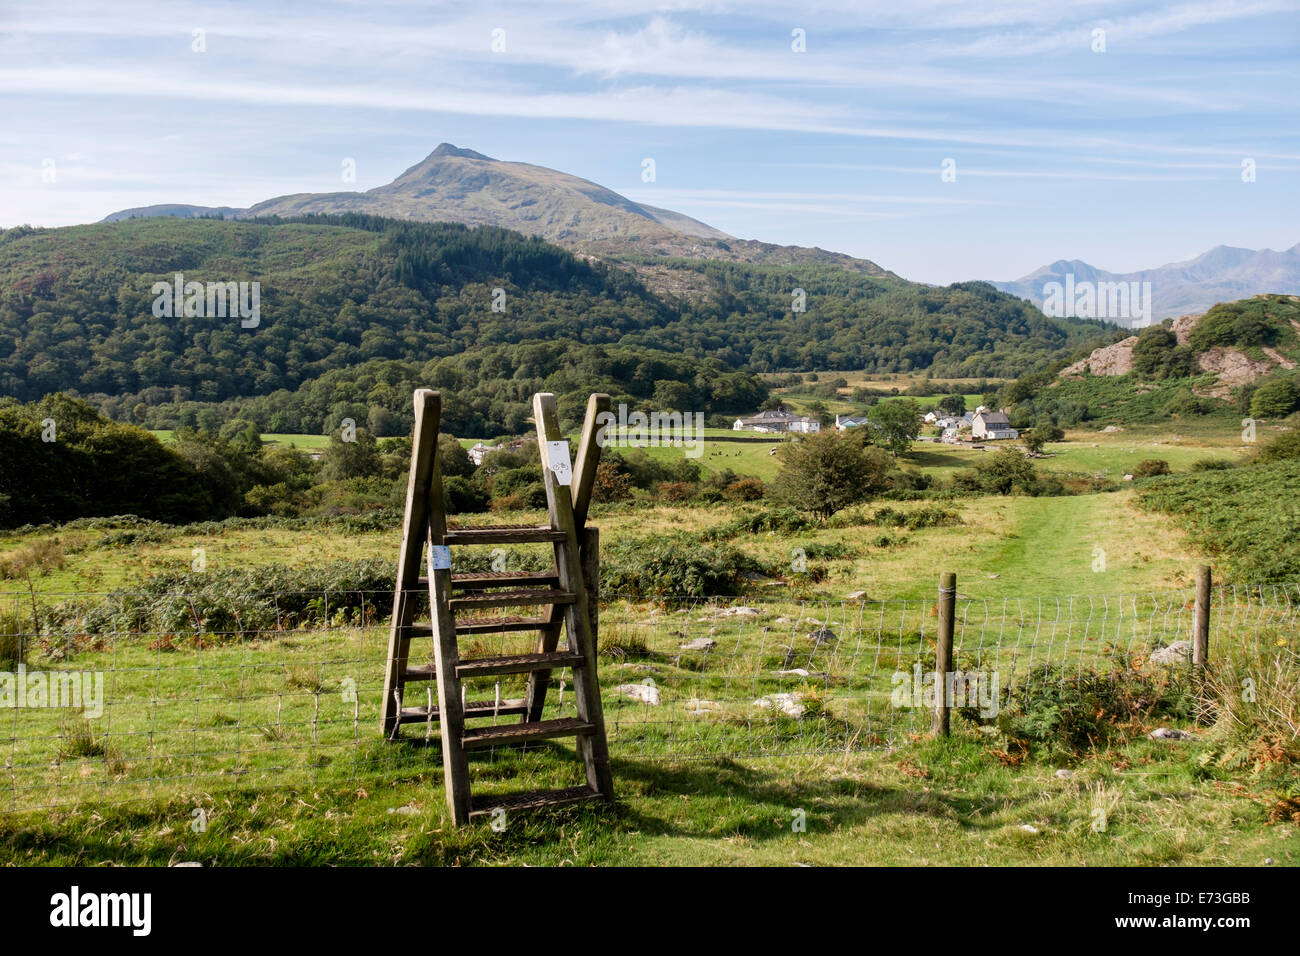 Ladder stile and view across valley to Carnedd Moel Siabod mountain in Snowdonia National Park (Eryri). Capel Curig Conwy Wales UK Stock Photo